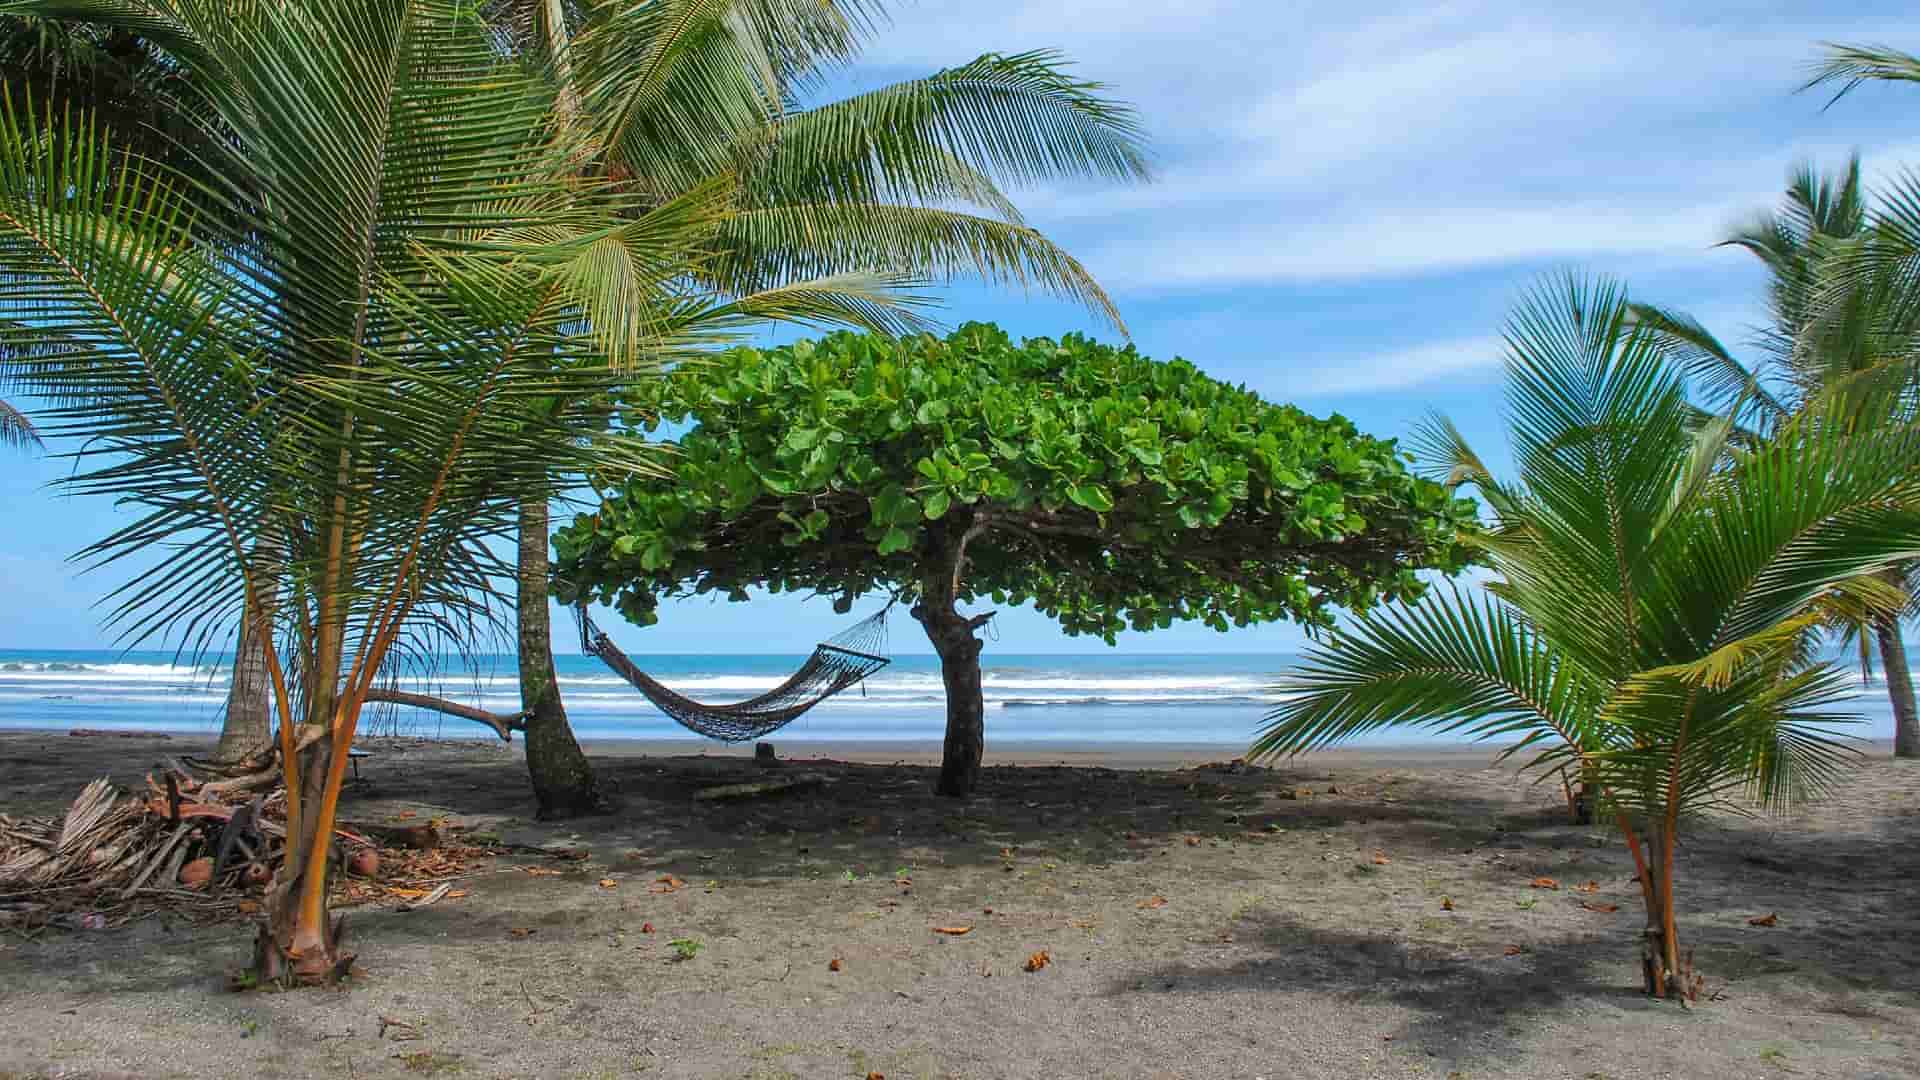 A hammock tied between two trees on a beach. The foreground shows a smaller palm tree with large fronds. The central tree, which supports the hammock, has a dense canopy of broad leaves.